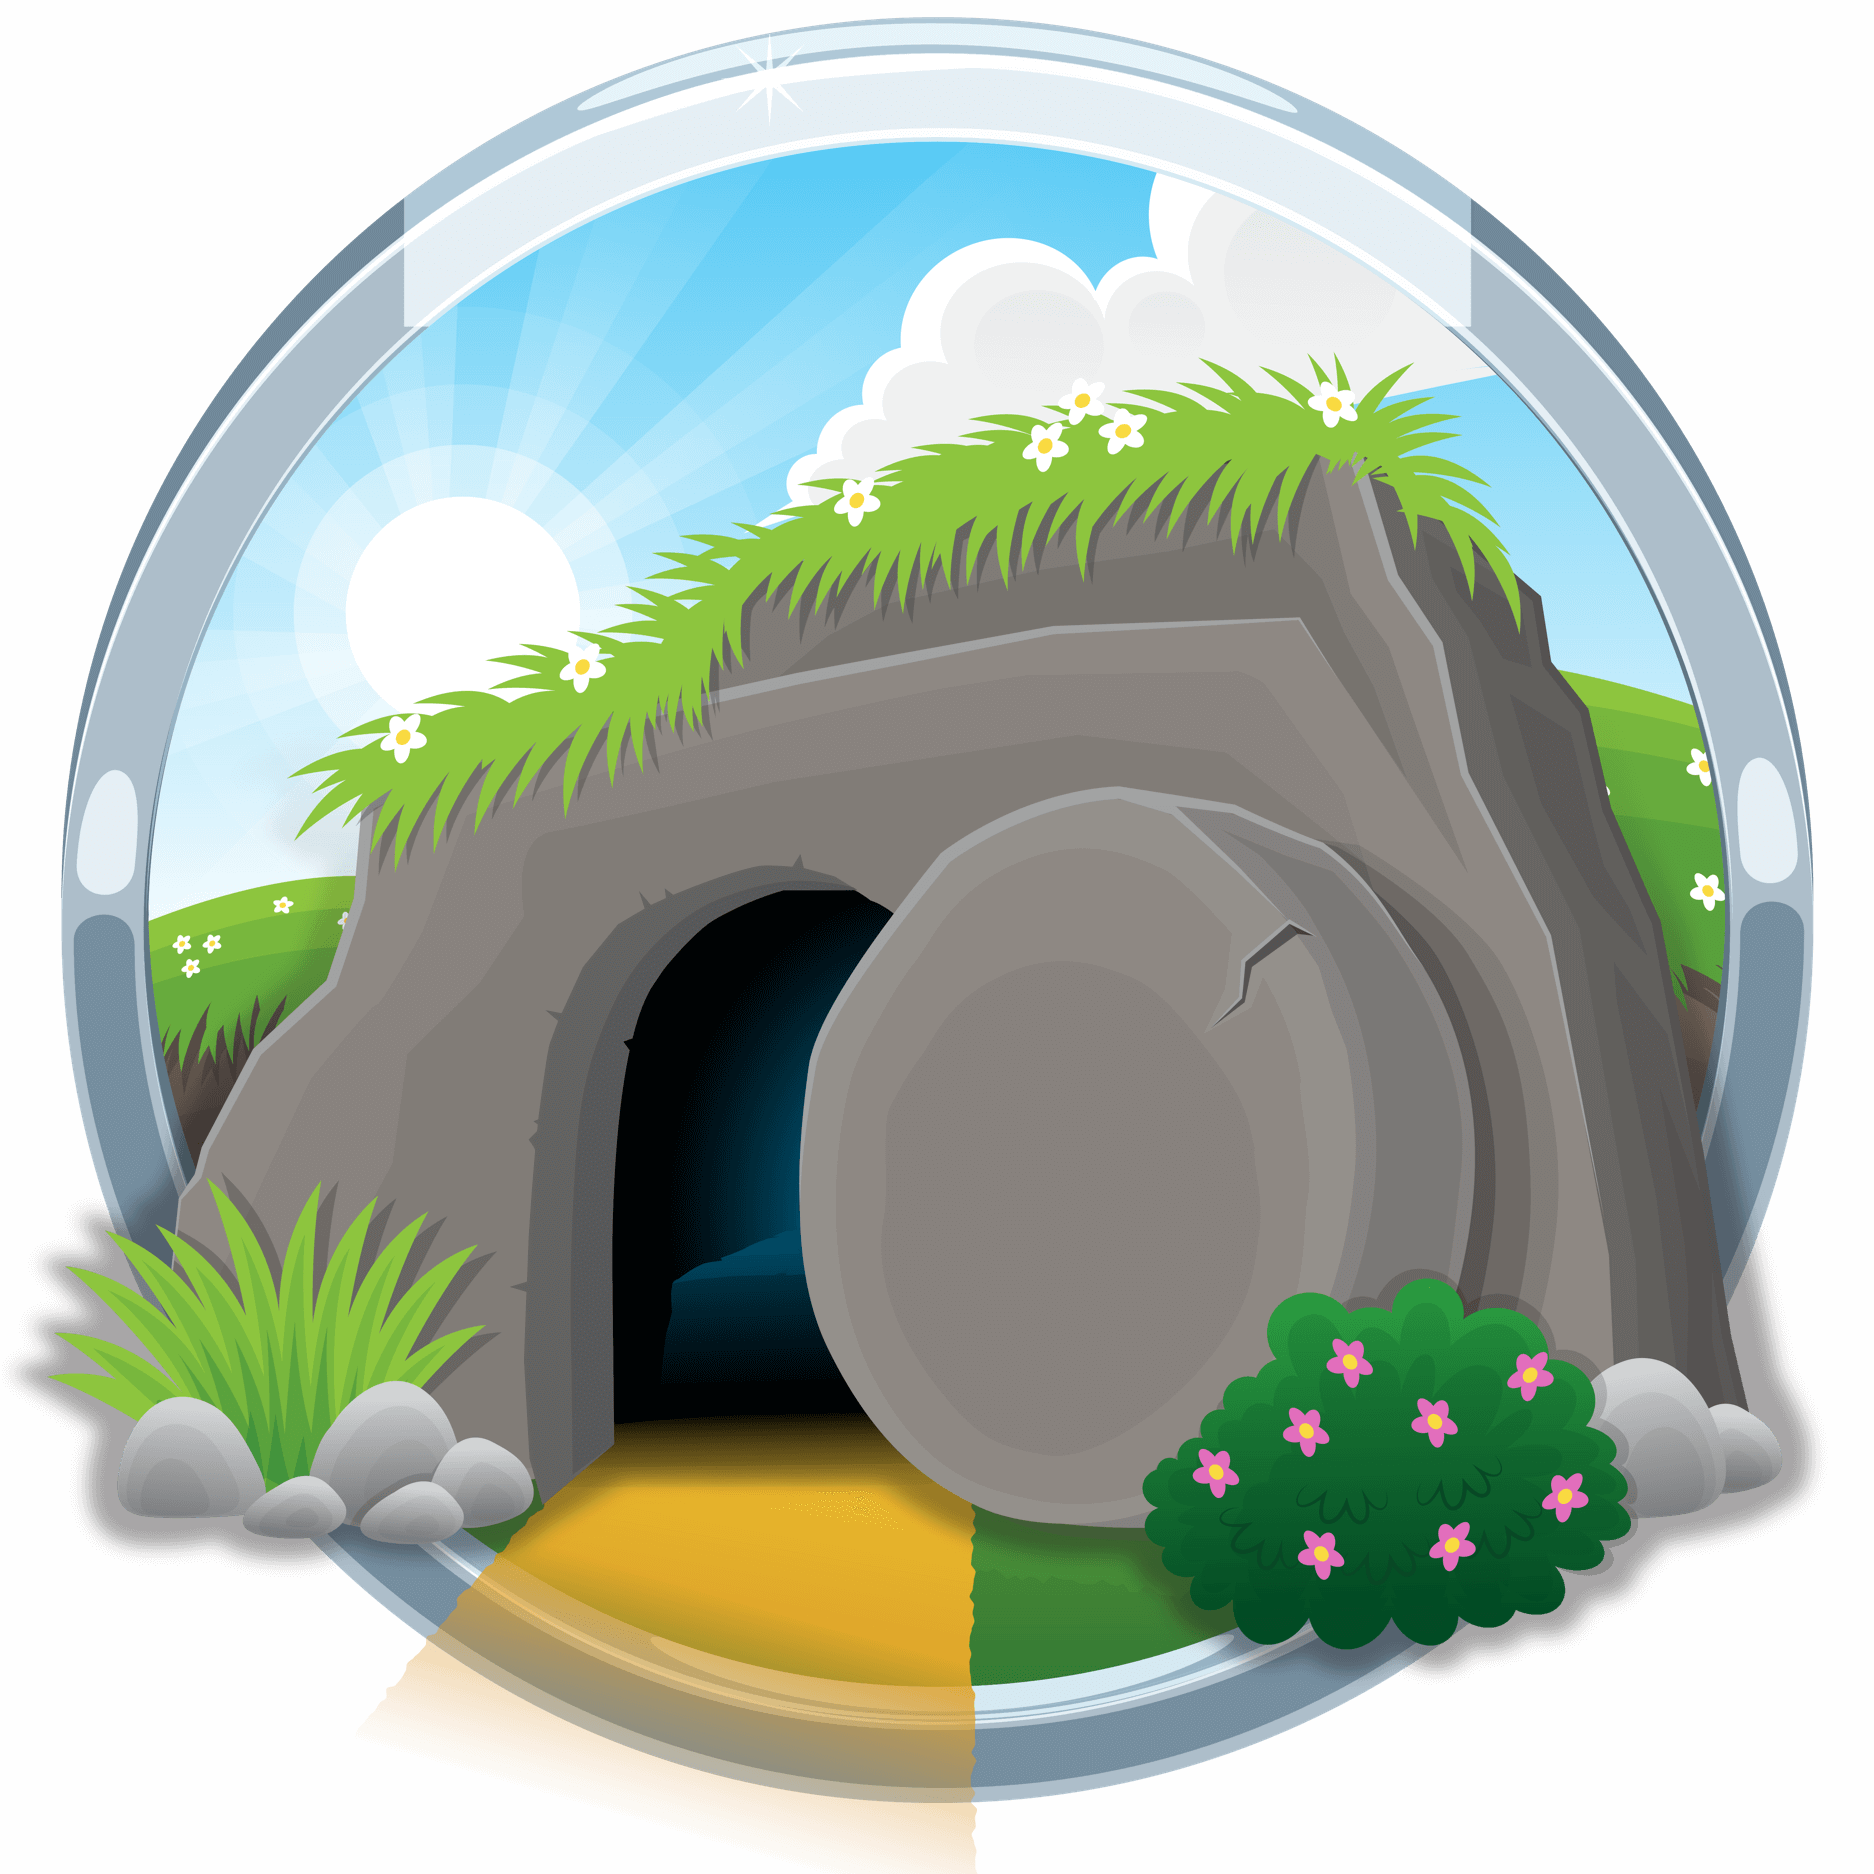 empty tomb clipart story